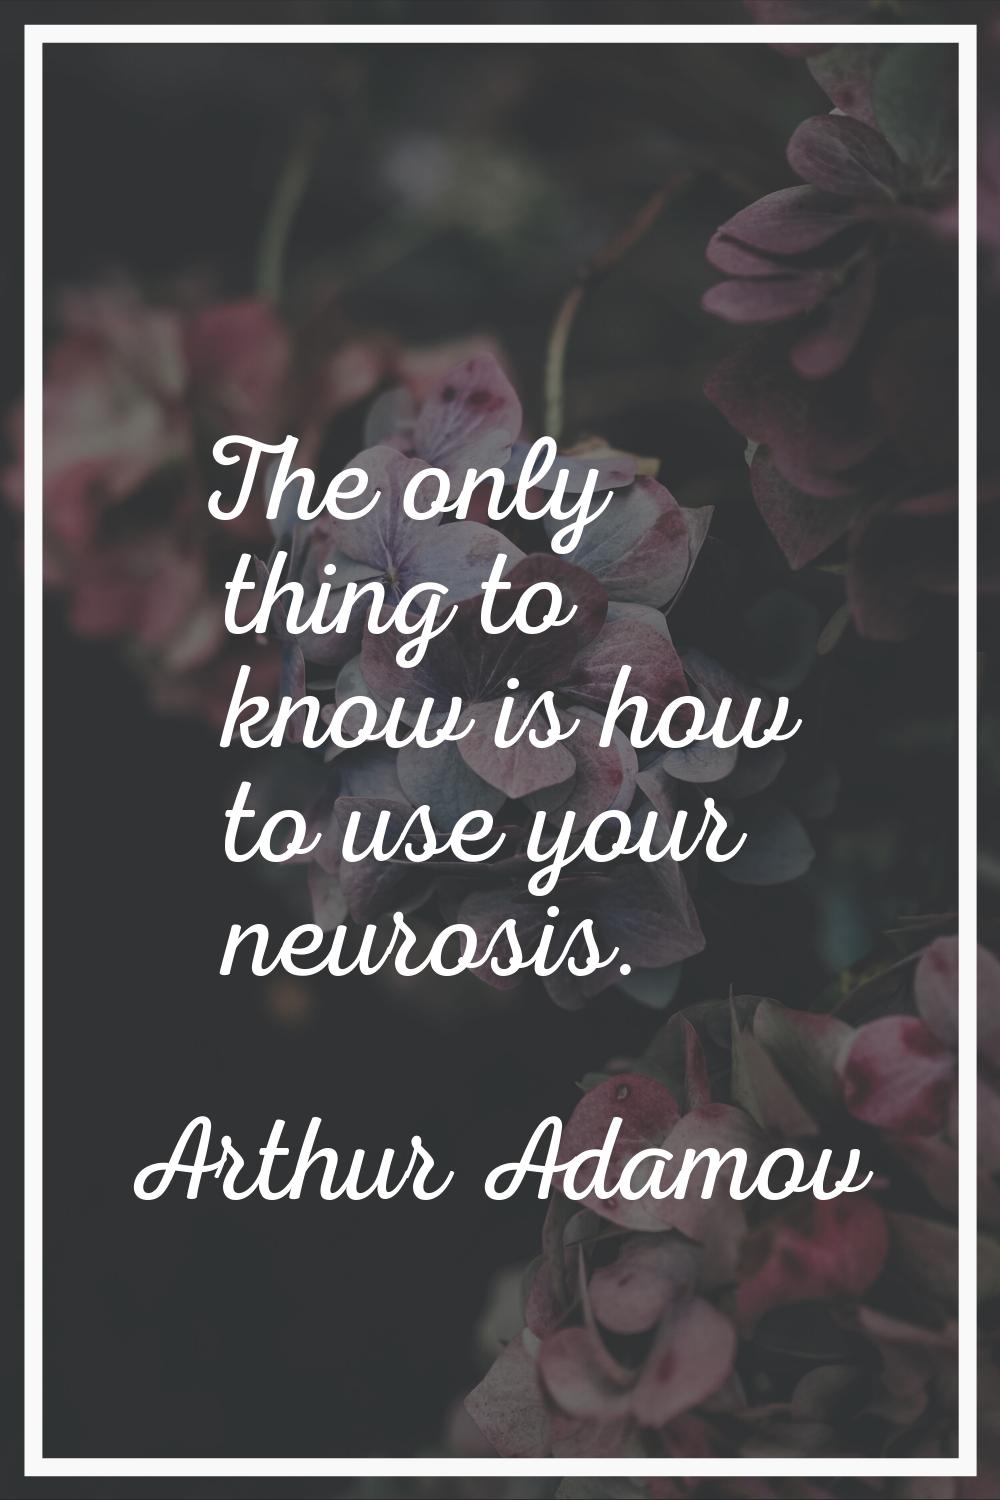 The only thing to know is how to use your neurosis.